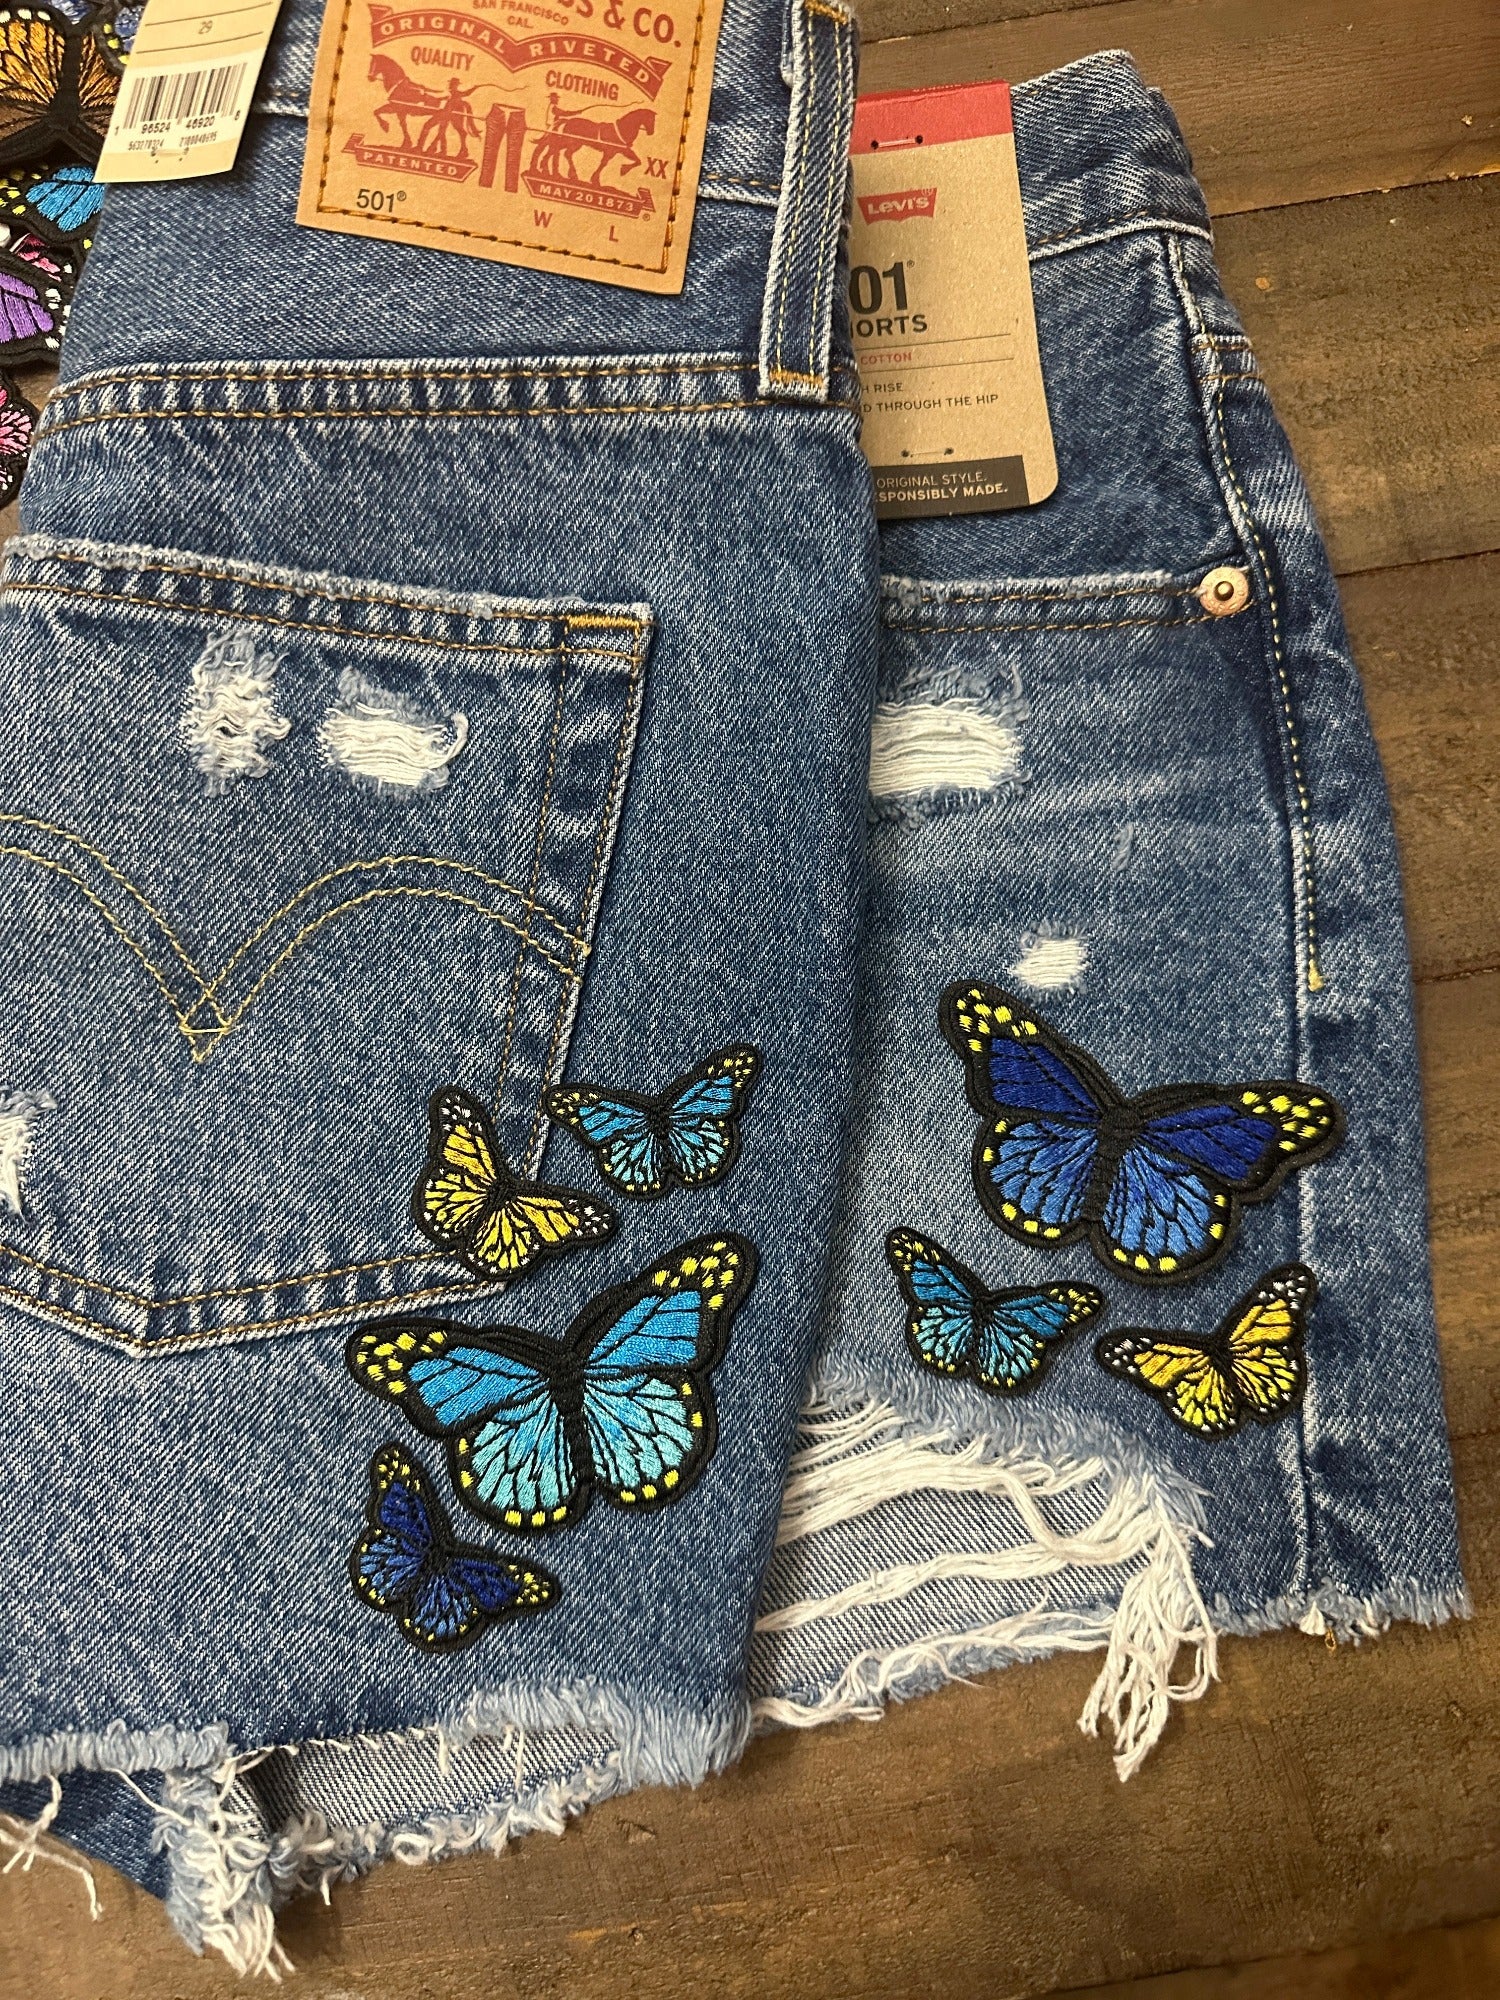 Butterfly Patch Add On To Denim